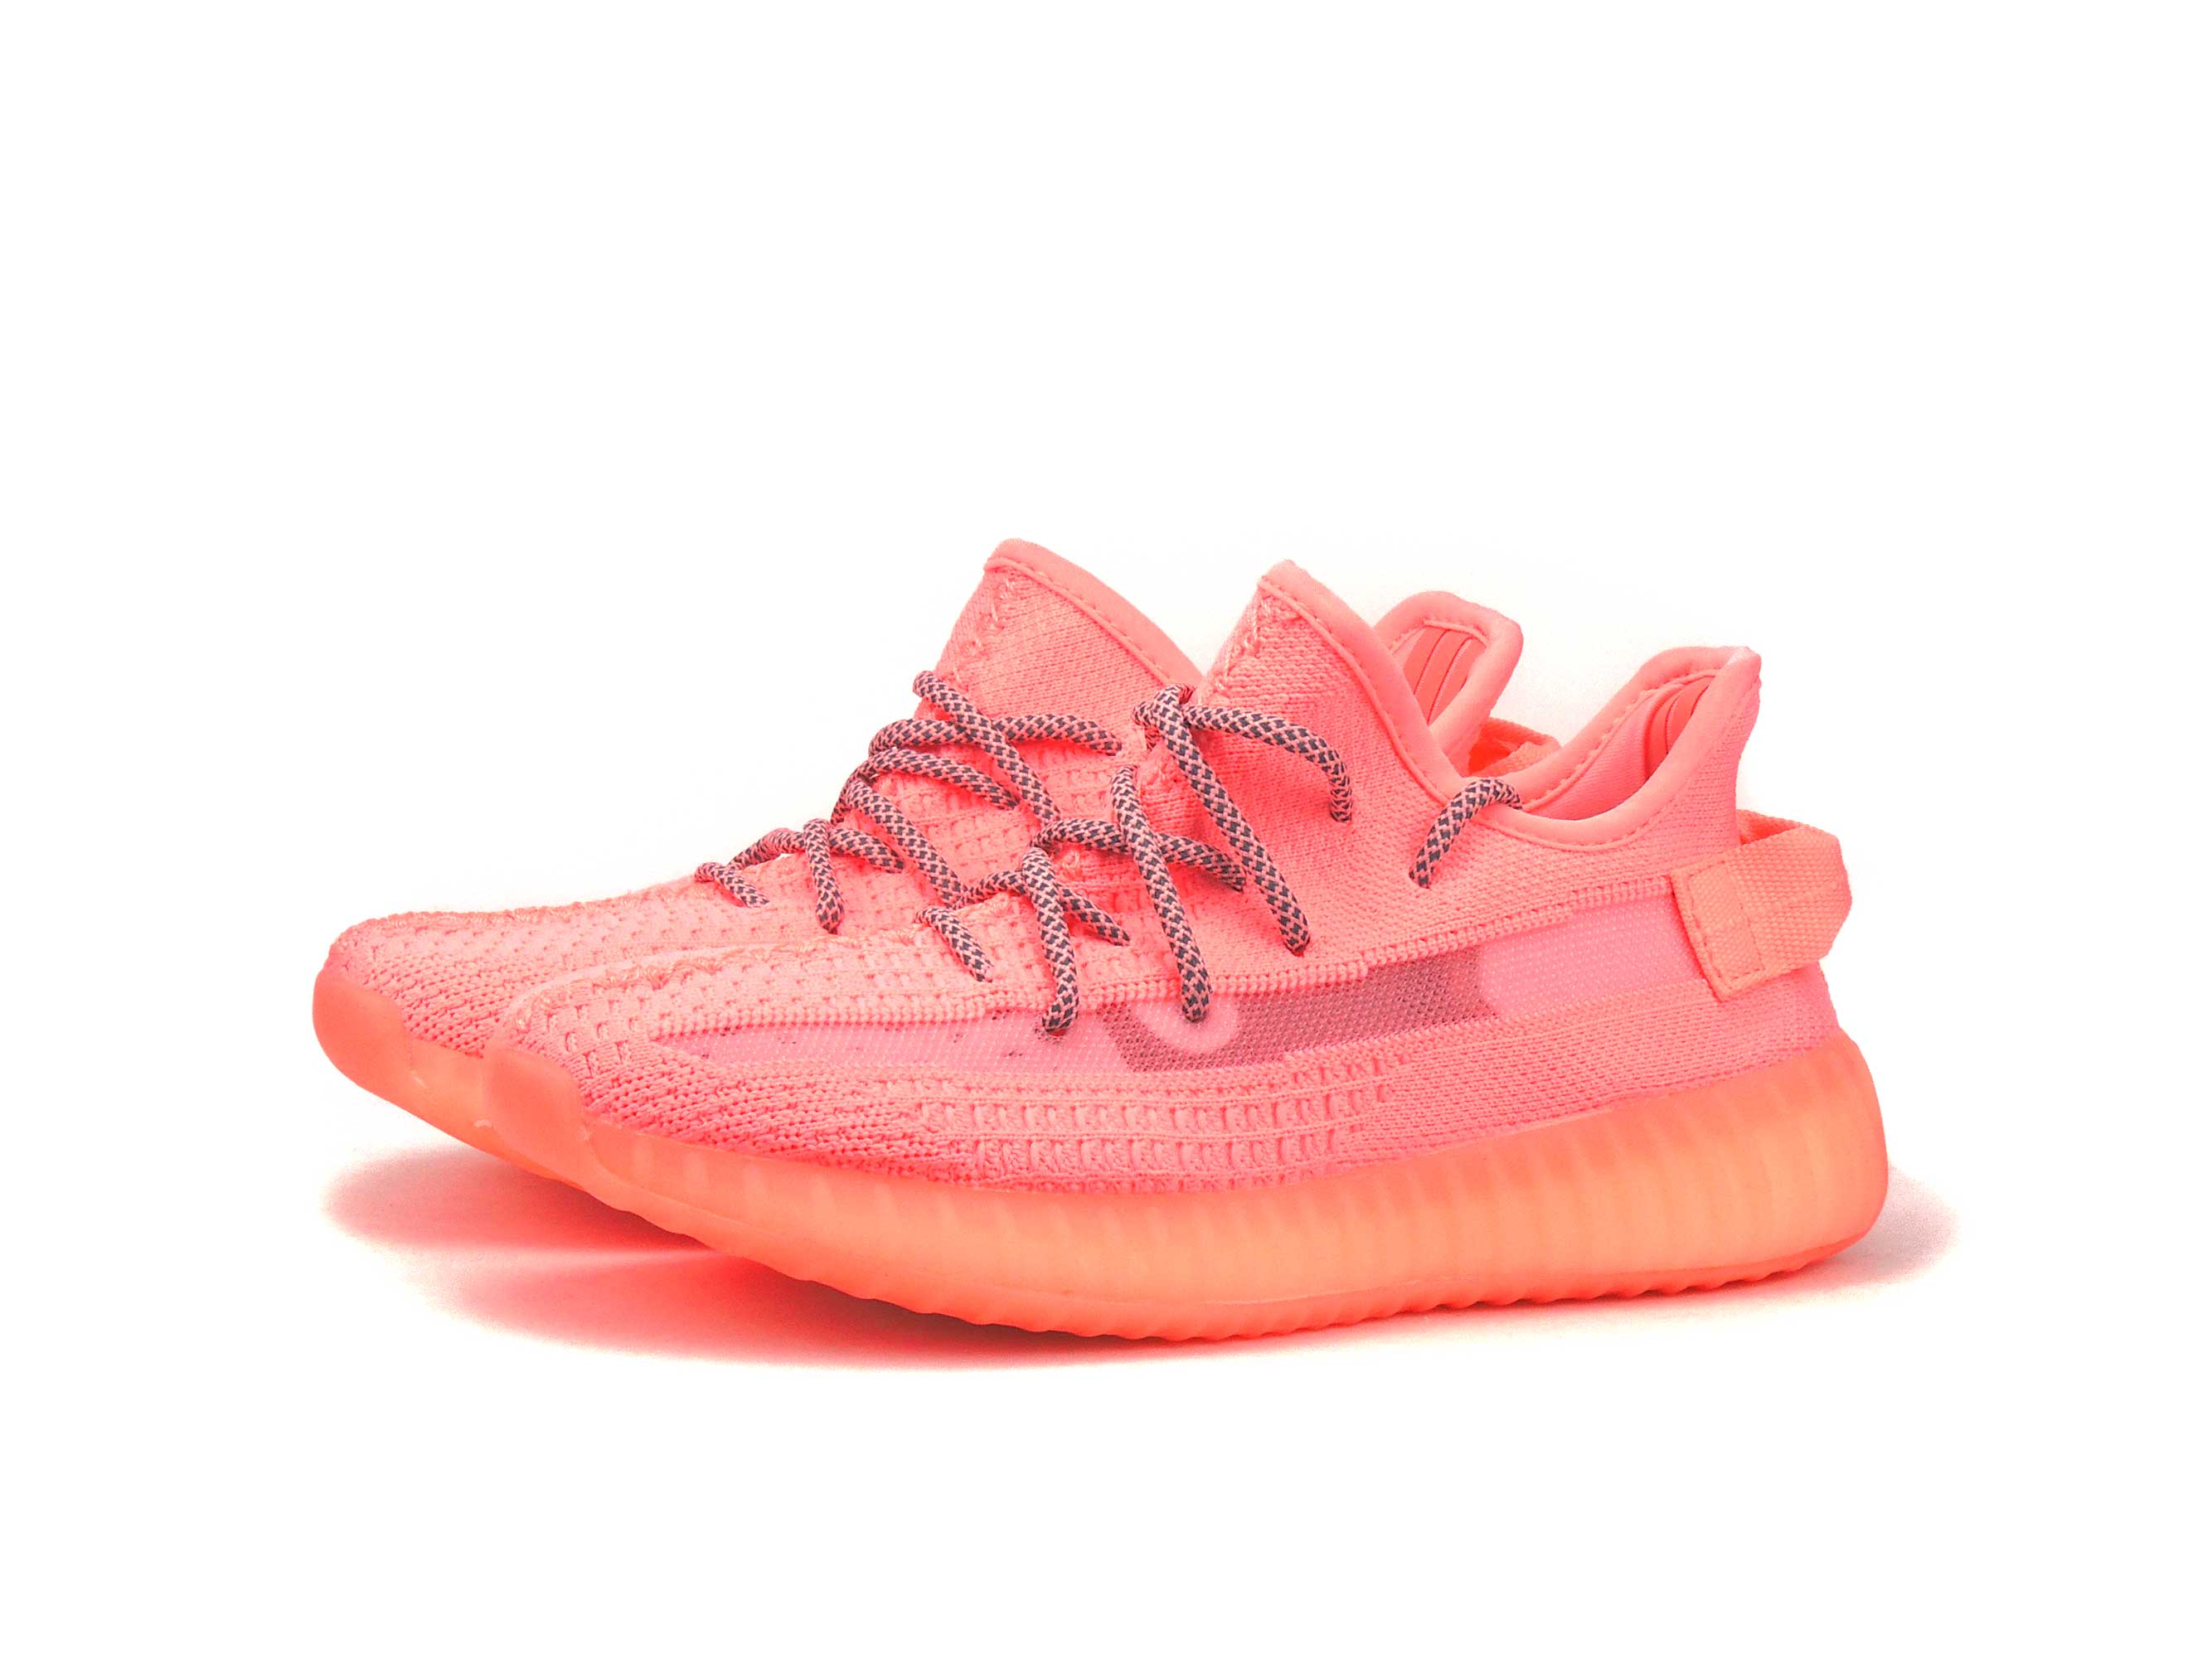 adidas yeezy boost 350 v2 pink rouse 